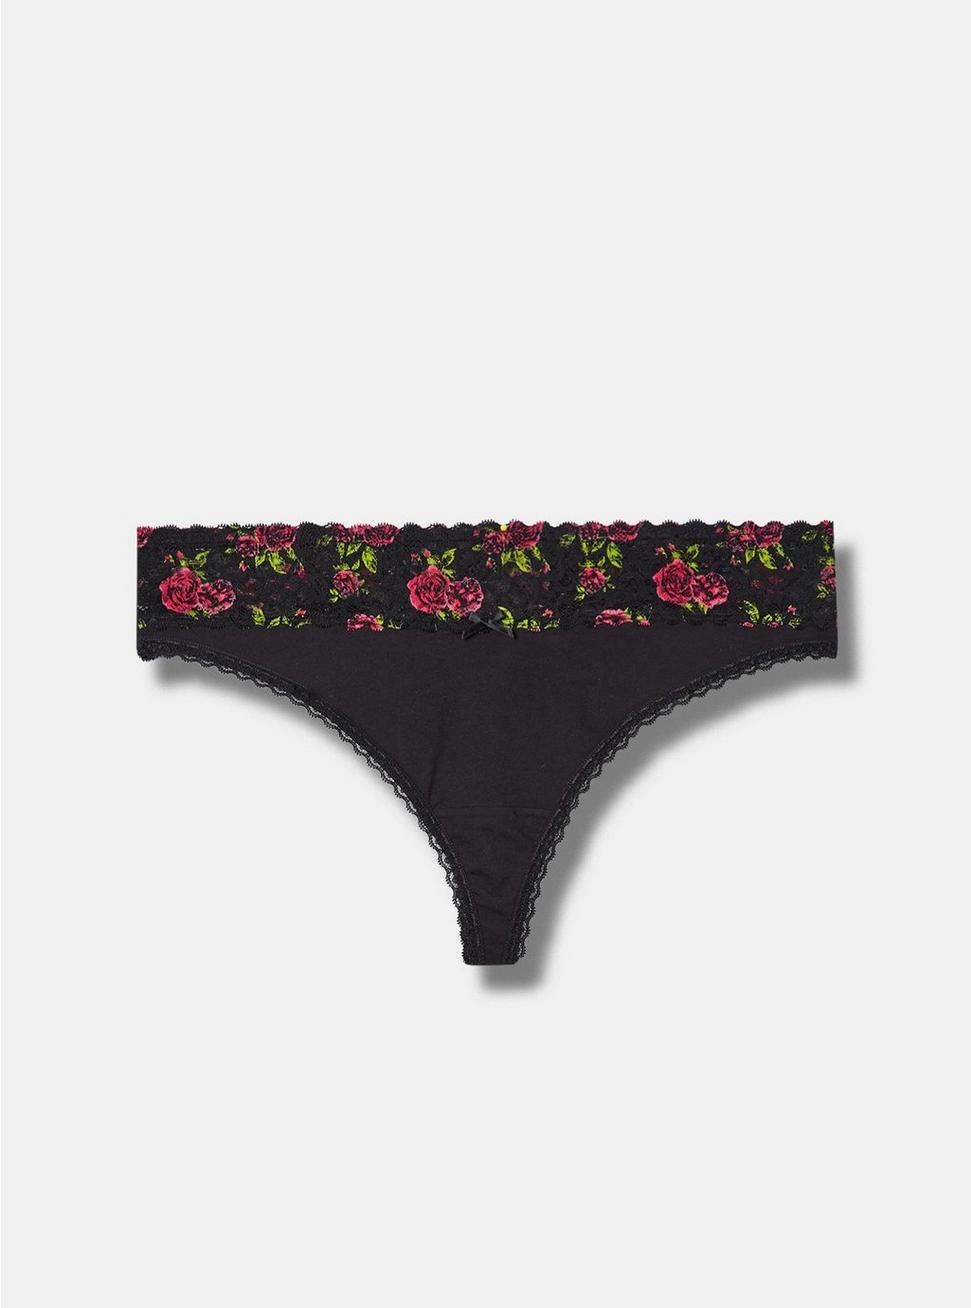 Cotton Mid Rise Thong Lace Panty, RICH BLACK BRUSHED ROSES FLORAL, hi-res